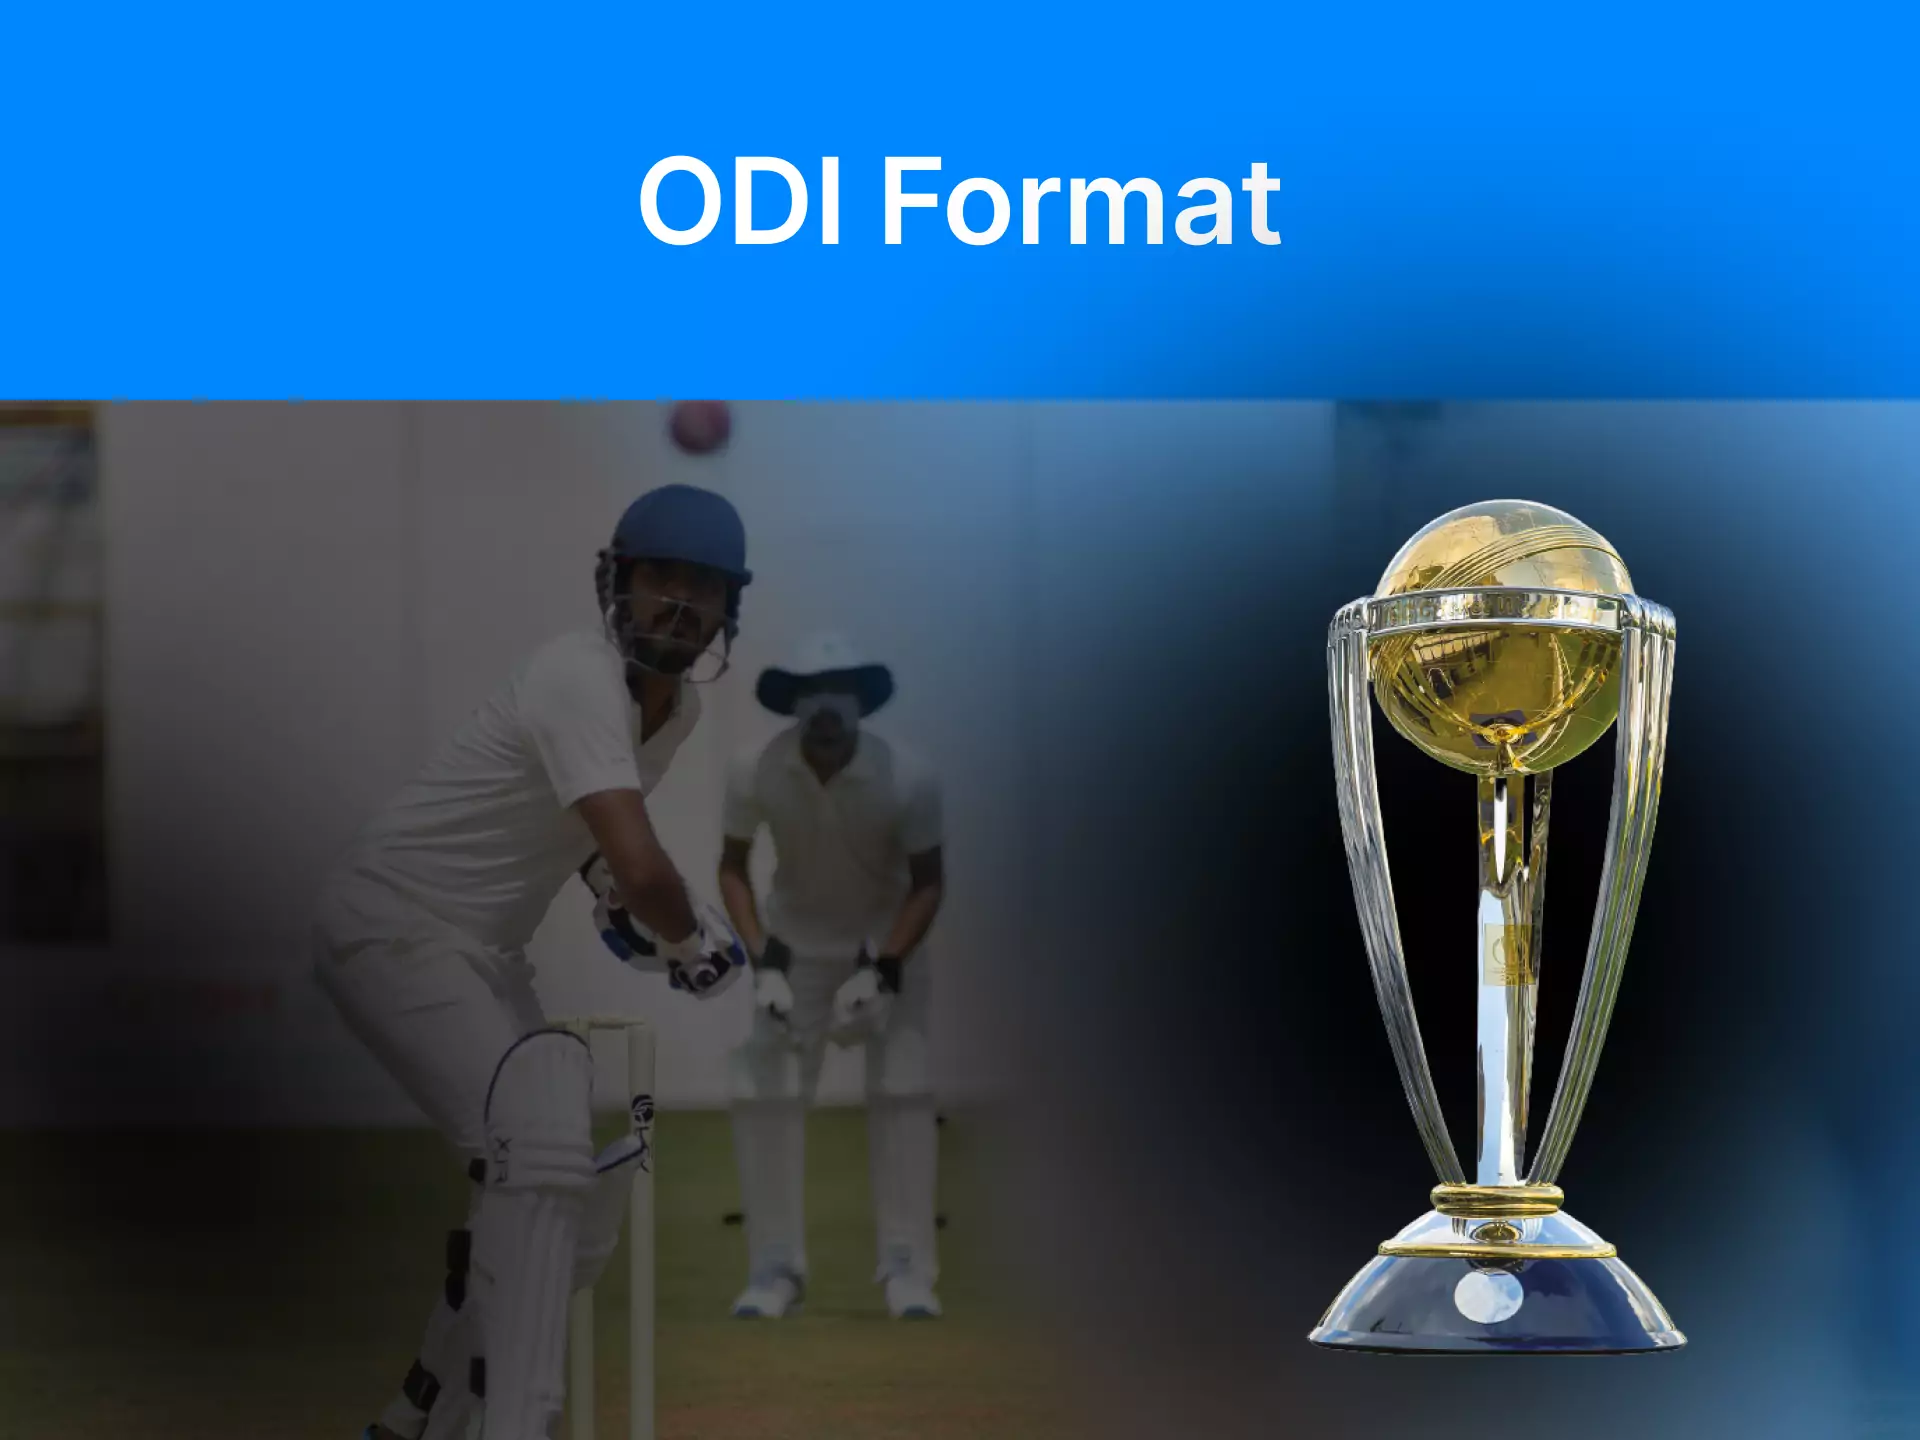 Find out how the ODI are run and what they mean.